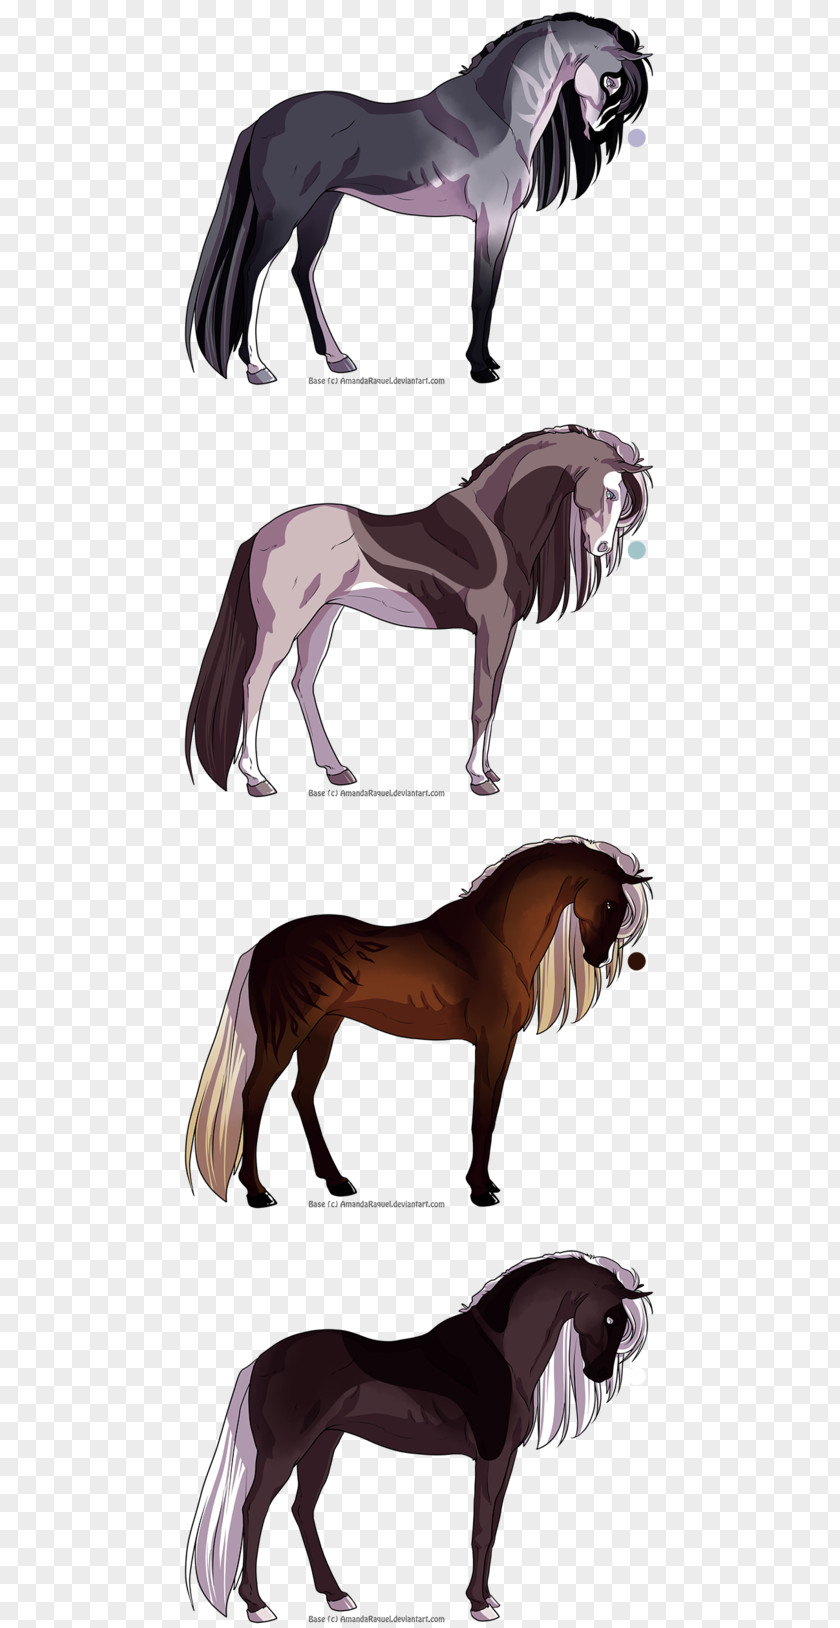 Horse Auction Mustang Legendary Creature Dog Canidae Illustration PNG